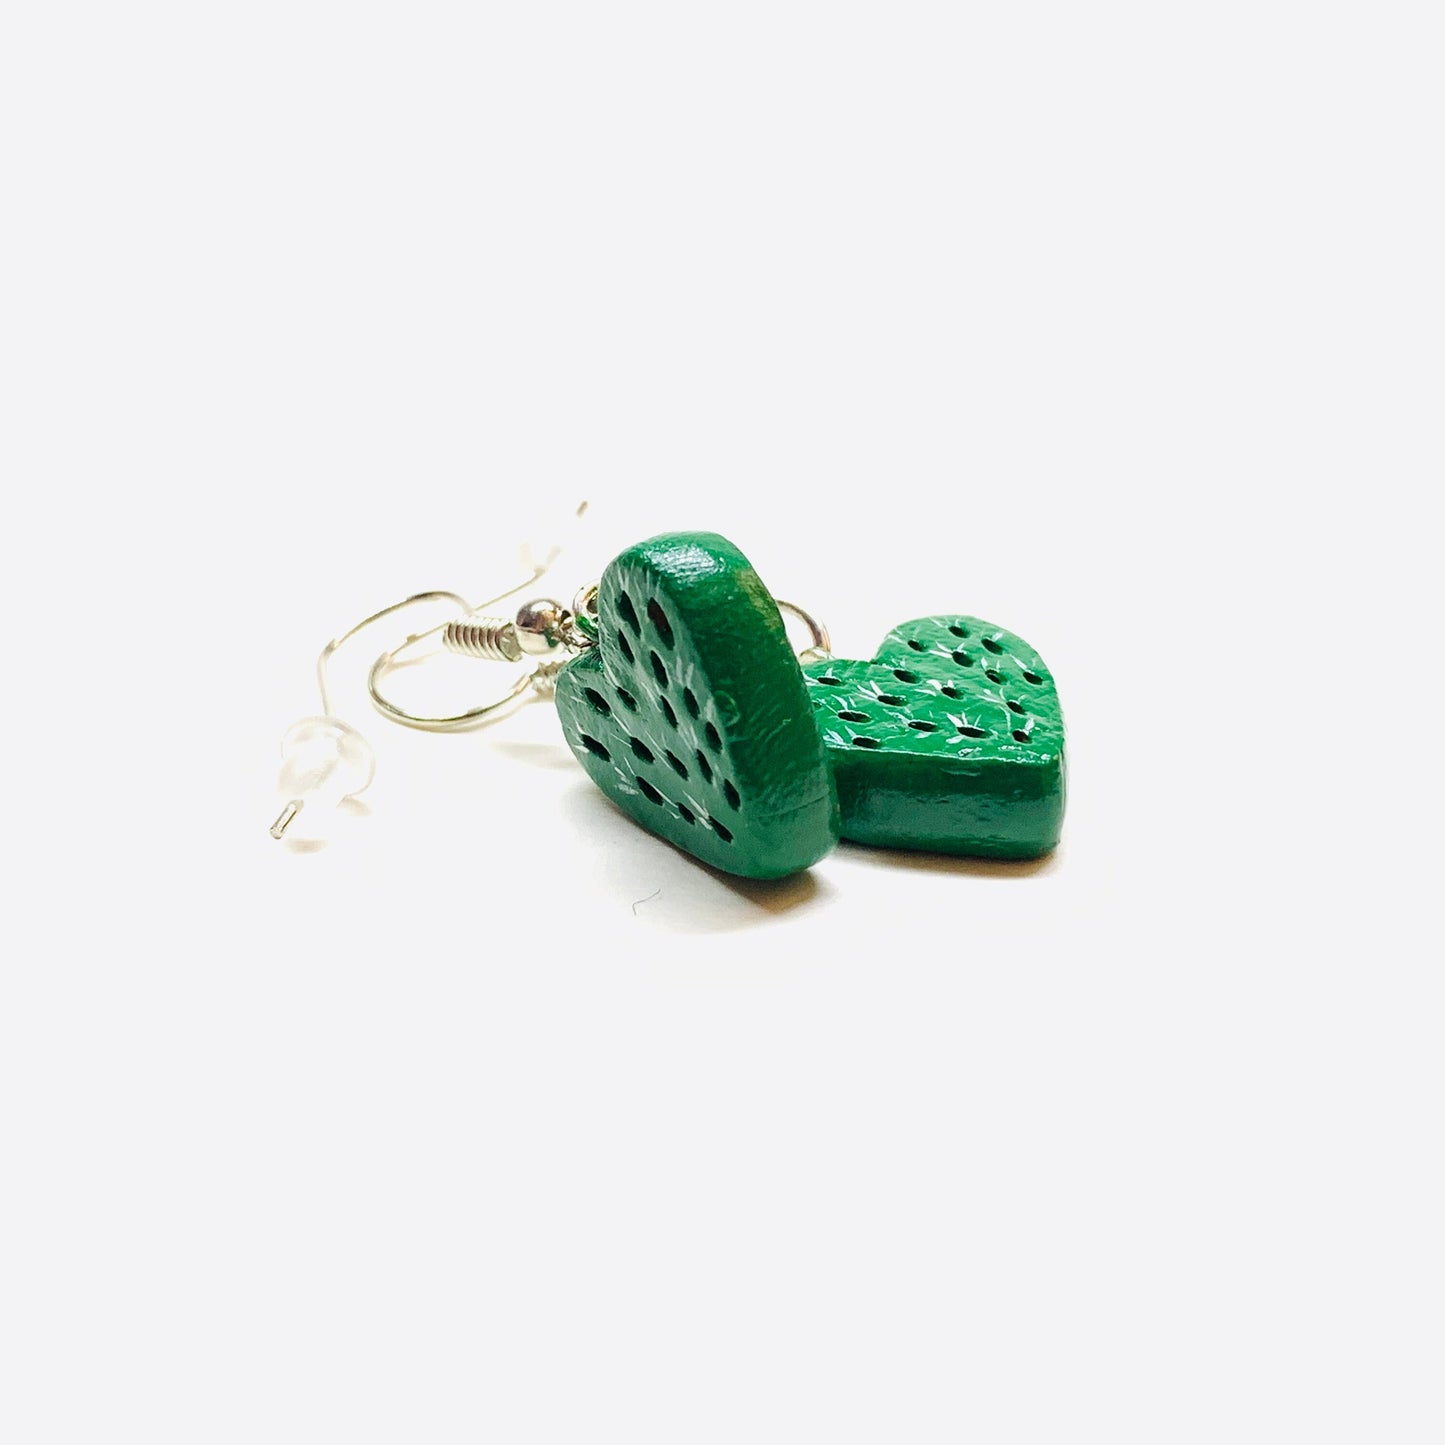 Charming Cactus Heart Clay Earrings Mexico MexiChic Girl Women Fashion Summer Jewelry WearableArt Aretes Gift Corazon Nopal Mujer Claywelry